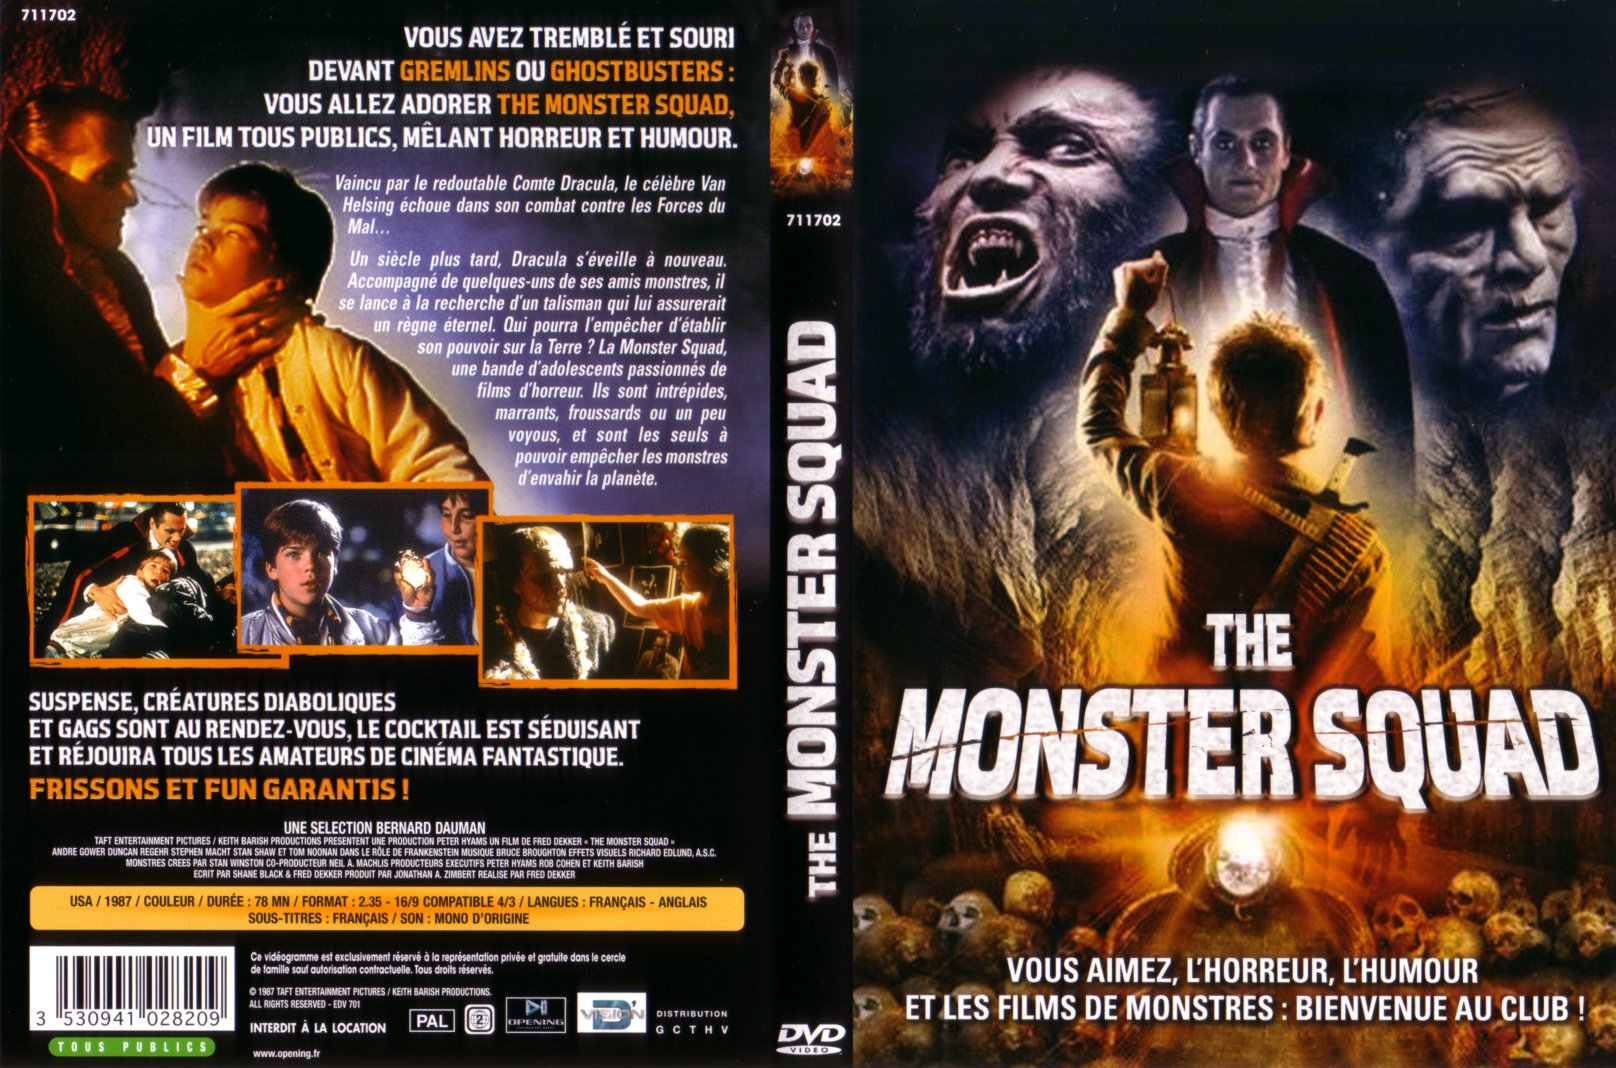 Jaquette DVD The monster squad